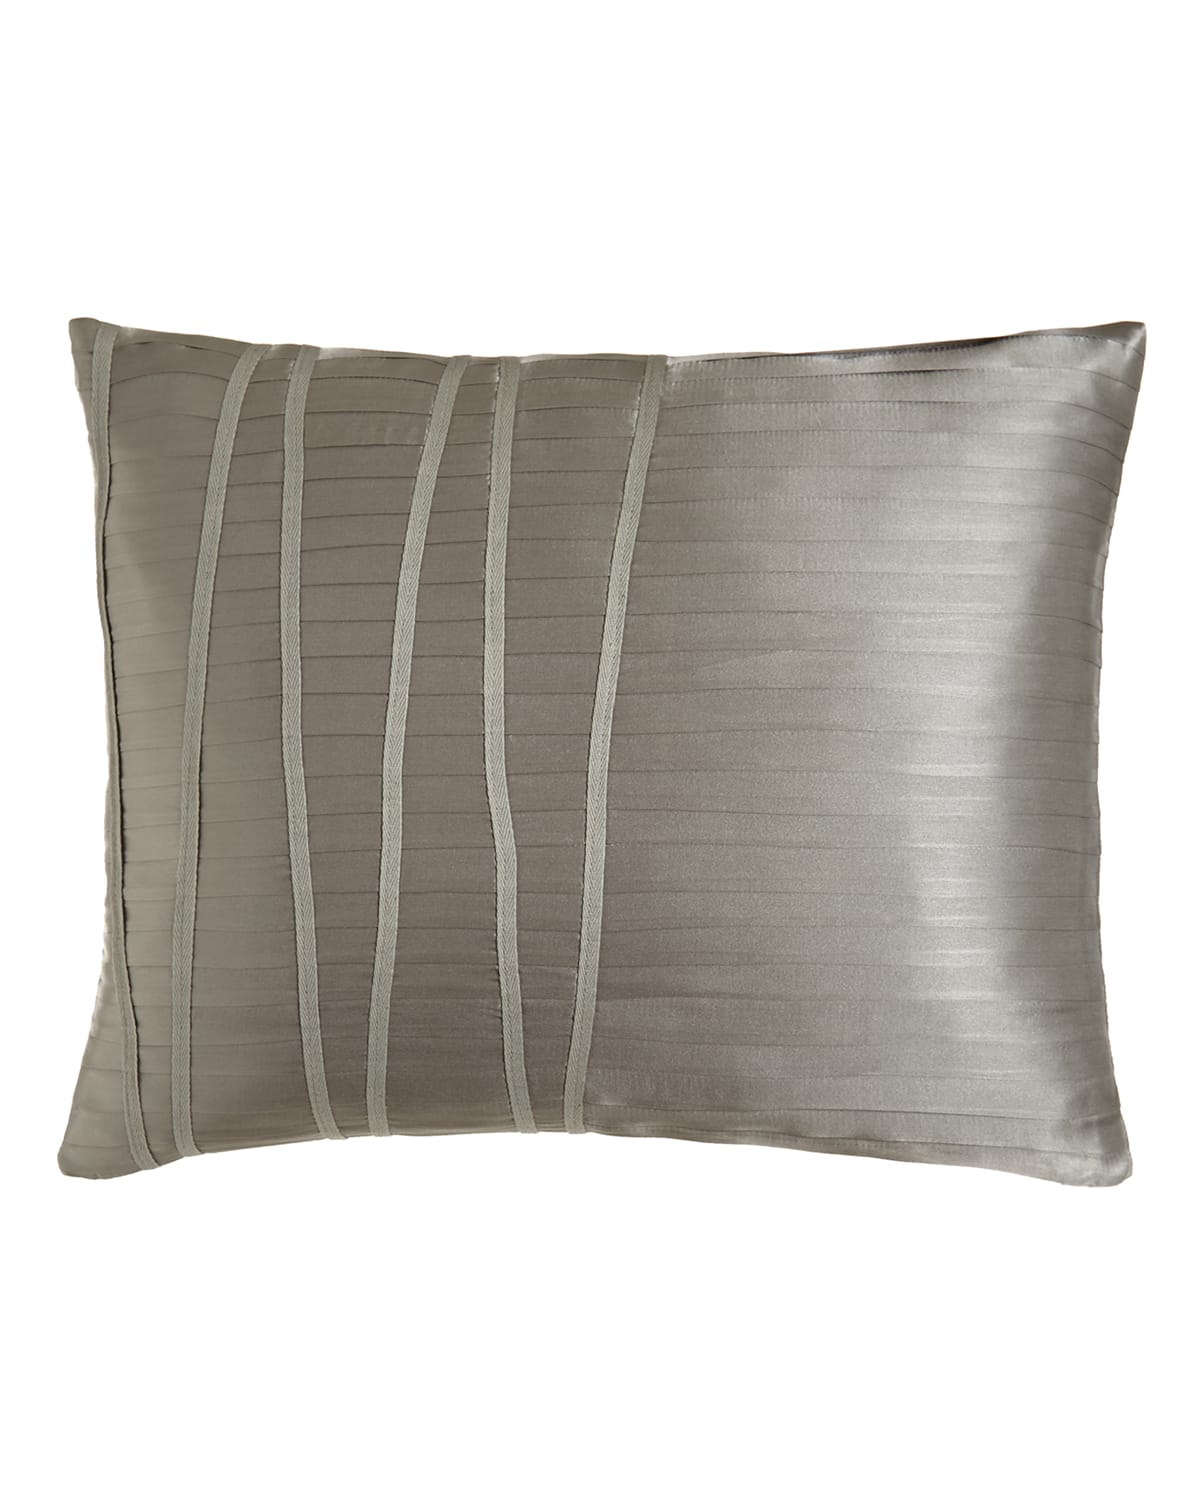 Image Donna Karan Home Reflection Pleated Pillow, 16" x 20"